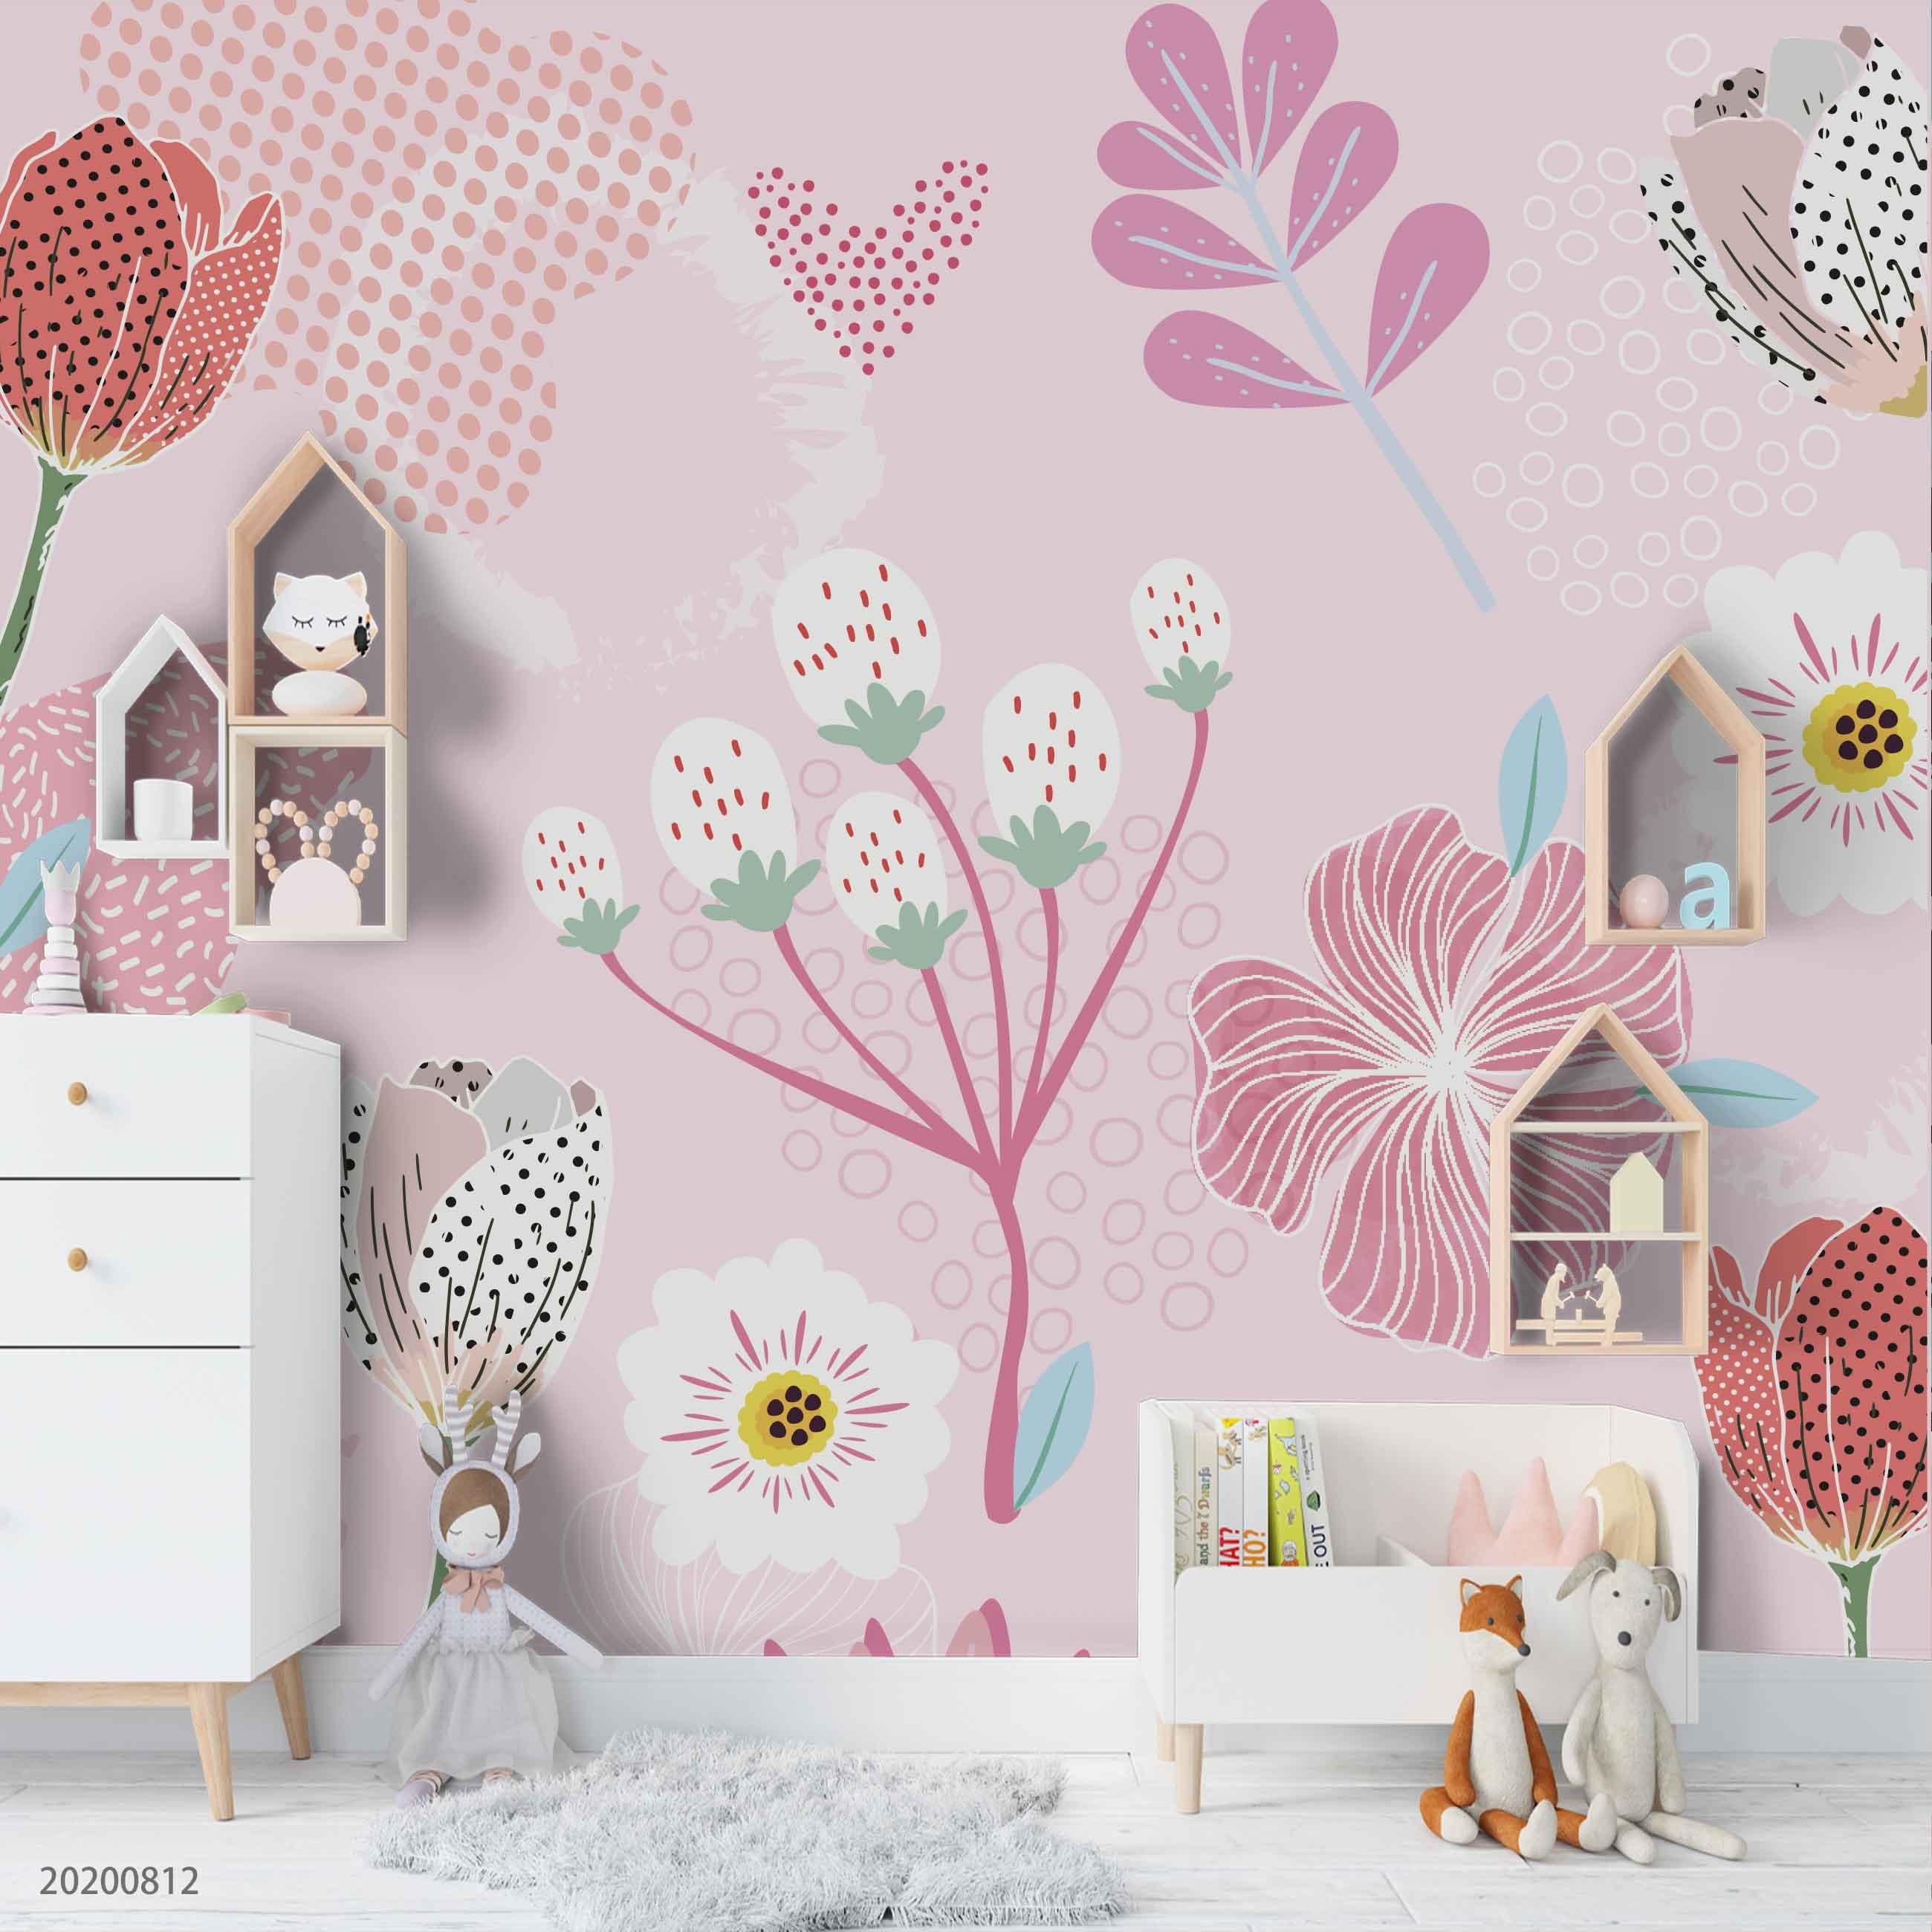 3D Hand Sketching Giant Colorful Floral Strawberry Wall Mural Wallpaper LXL 1105- Jess Art Decoration